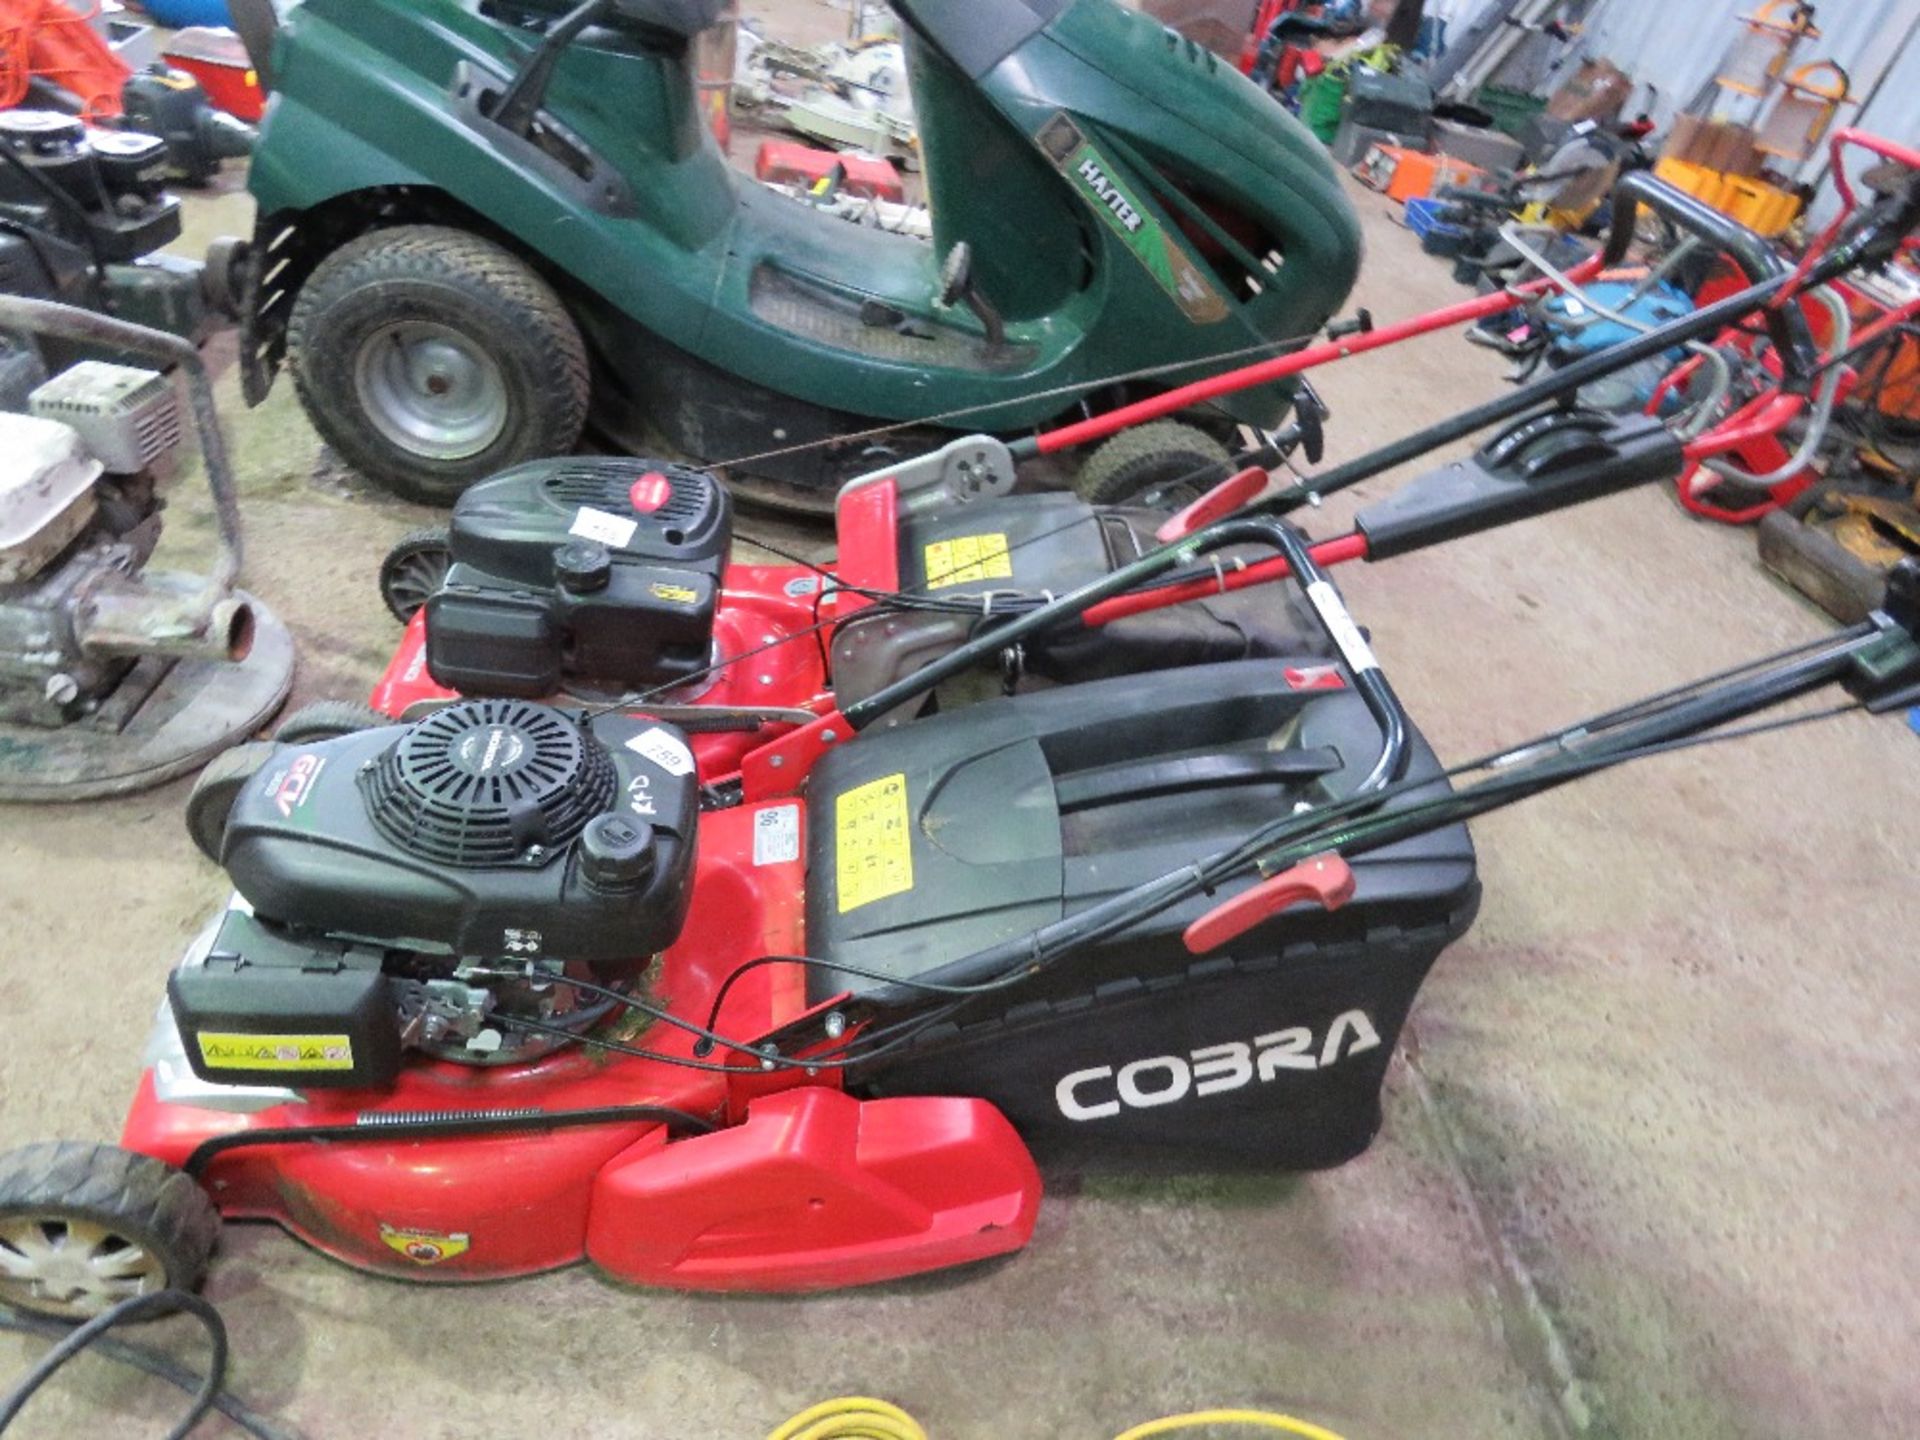 COBRA PETROL ENGINED ROLLER MOWER WITH COLLECTOR. WHEN TESTED WAS SEEN TO RUN AND DRIVE. THIS LOT